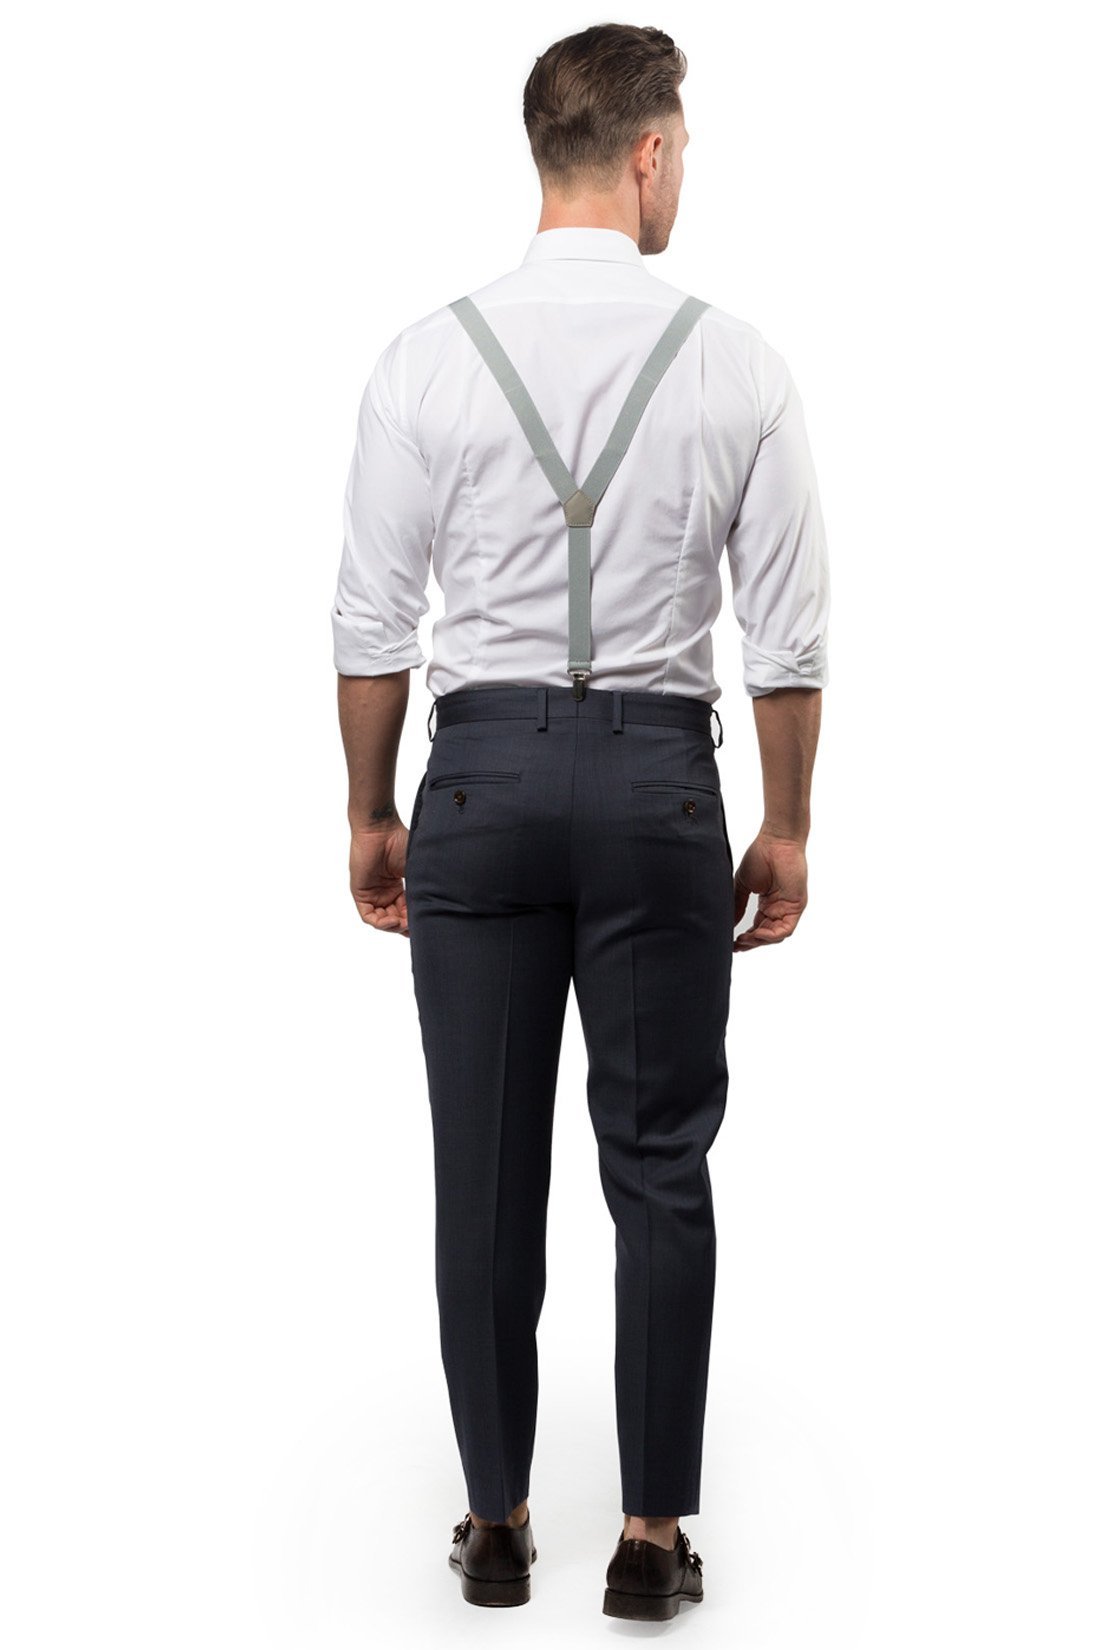 Black Suspenders with Grey Dress Pants Outfits 9 ideas  outfits   Lookastic